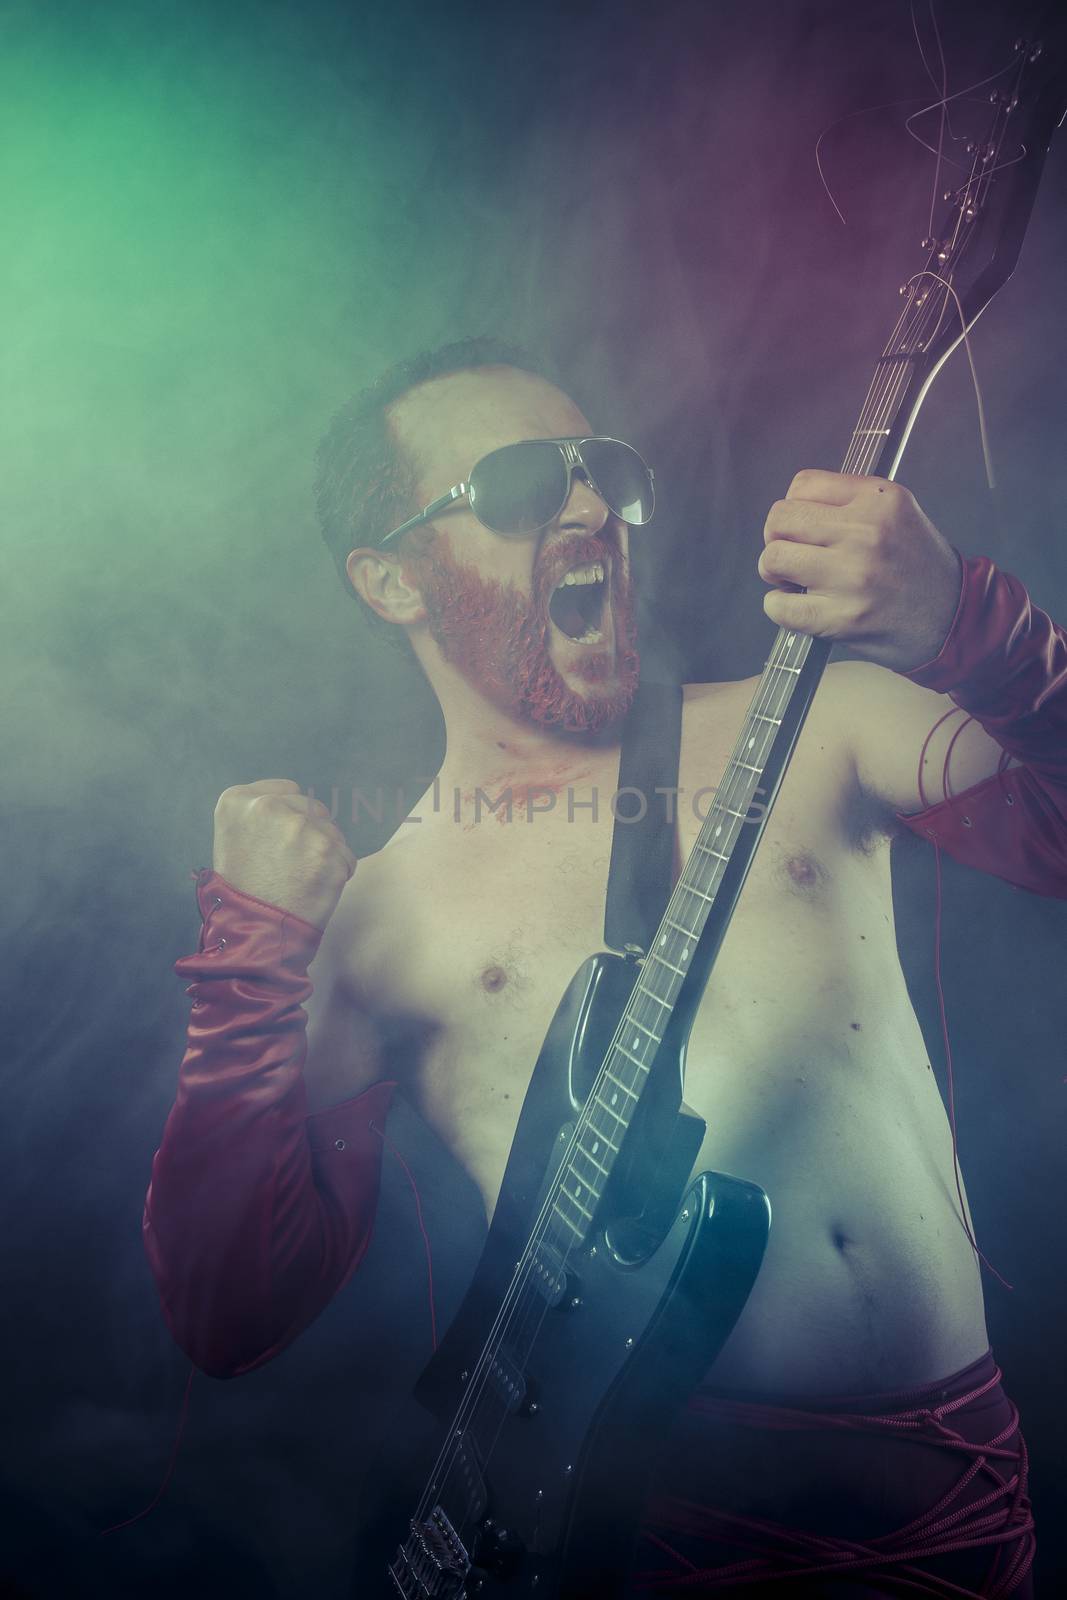 Metal, rocker man with electric guitar in a rock concert by FernandoCortes